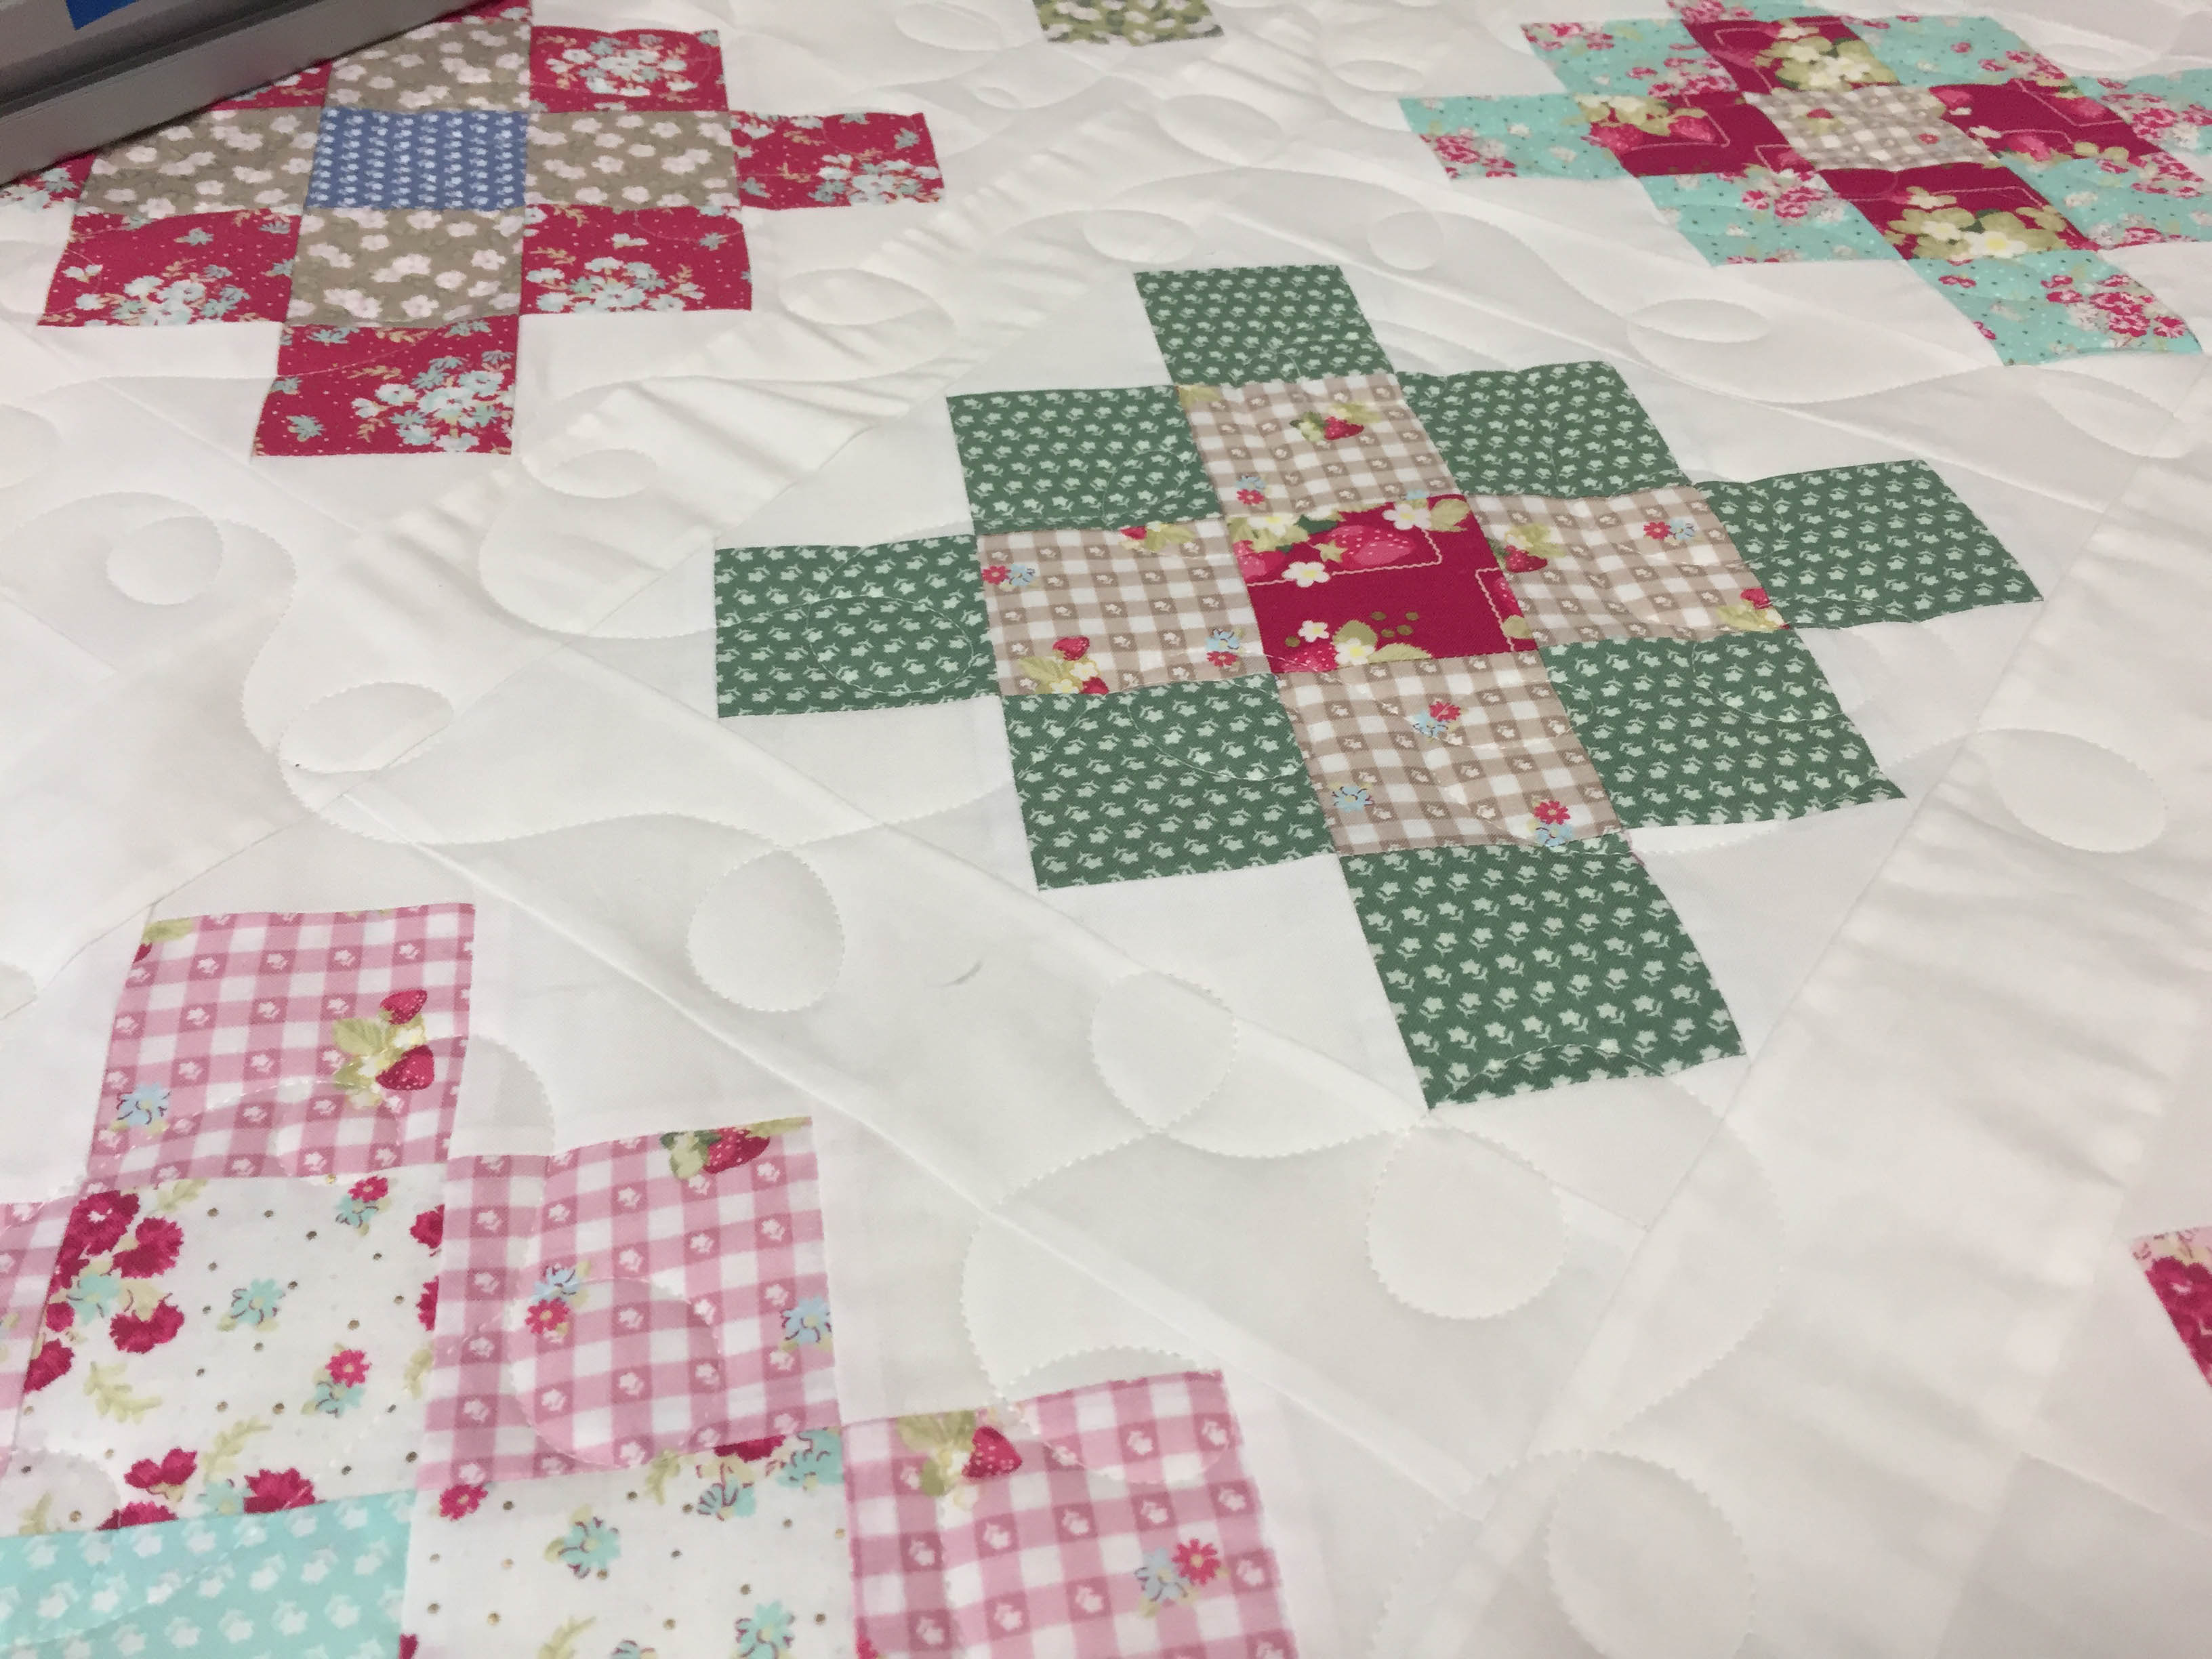 Loopy Meander quilting